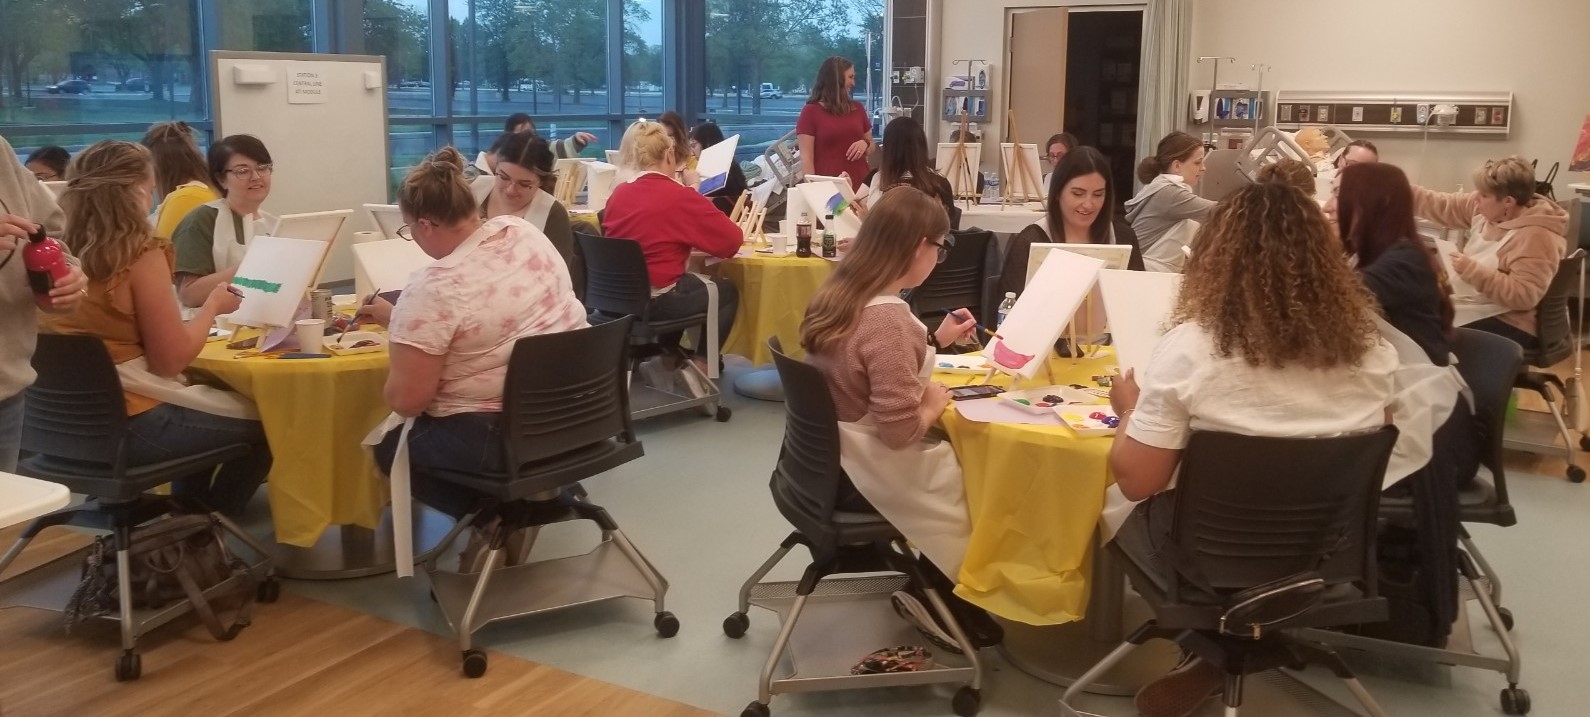 Participants sitting at tables painting